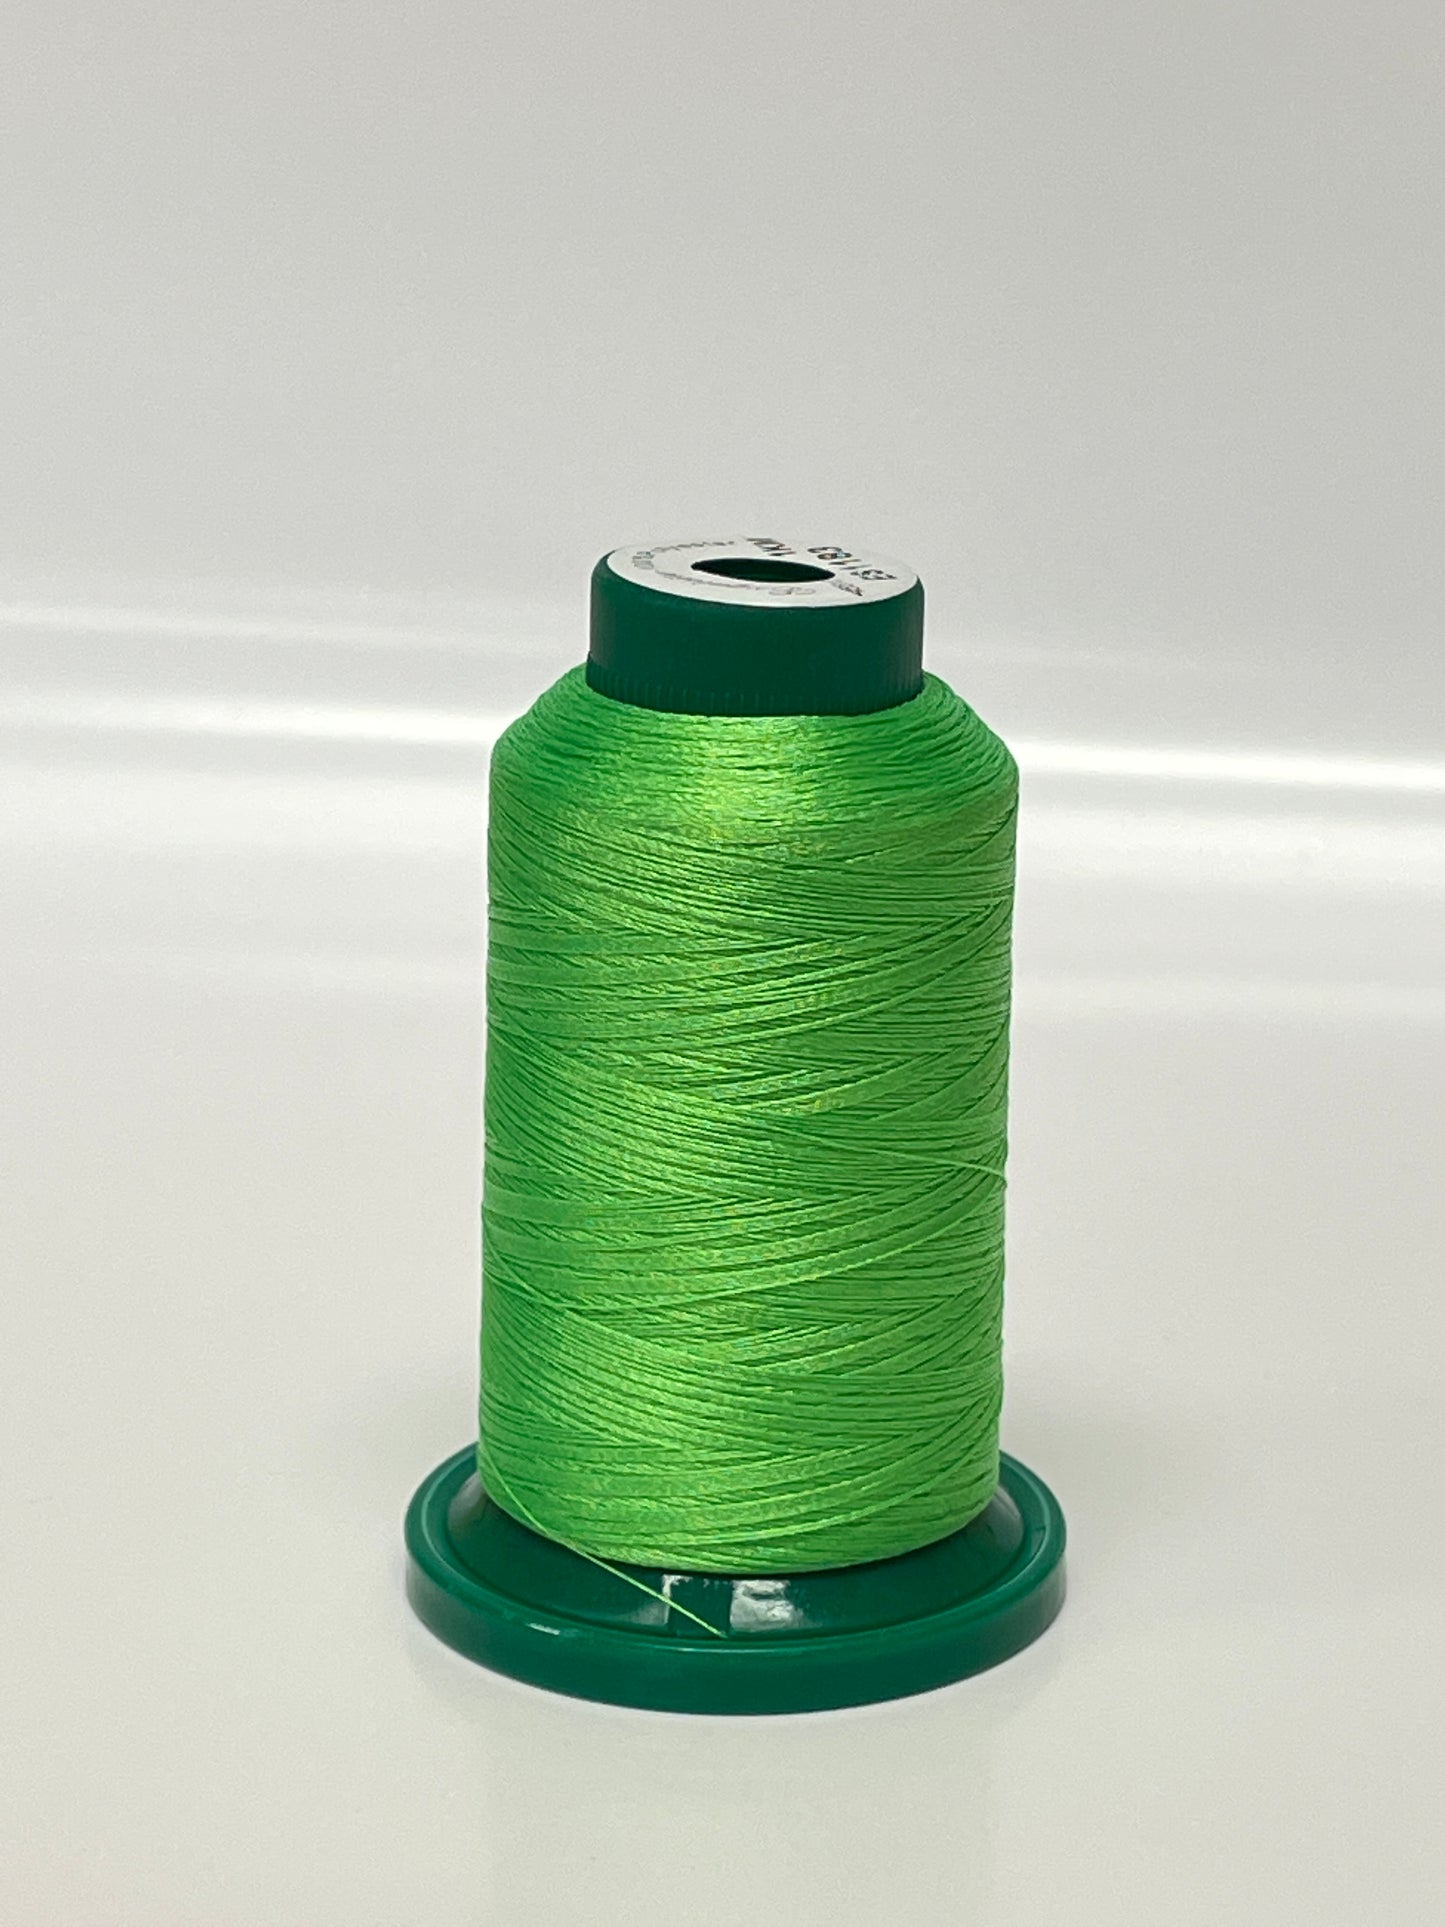 Exquisite Embroidery Threads - Greens